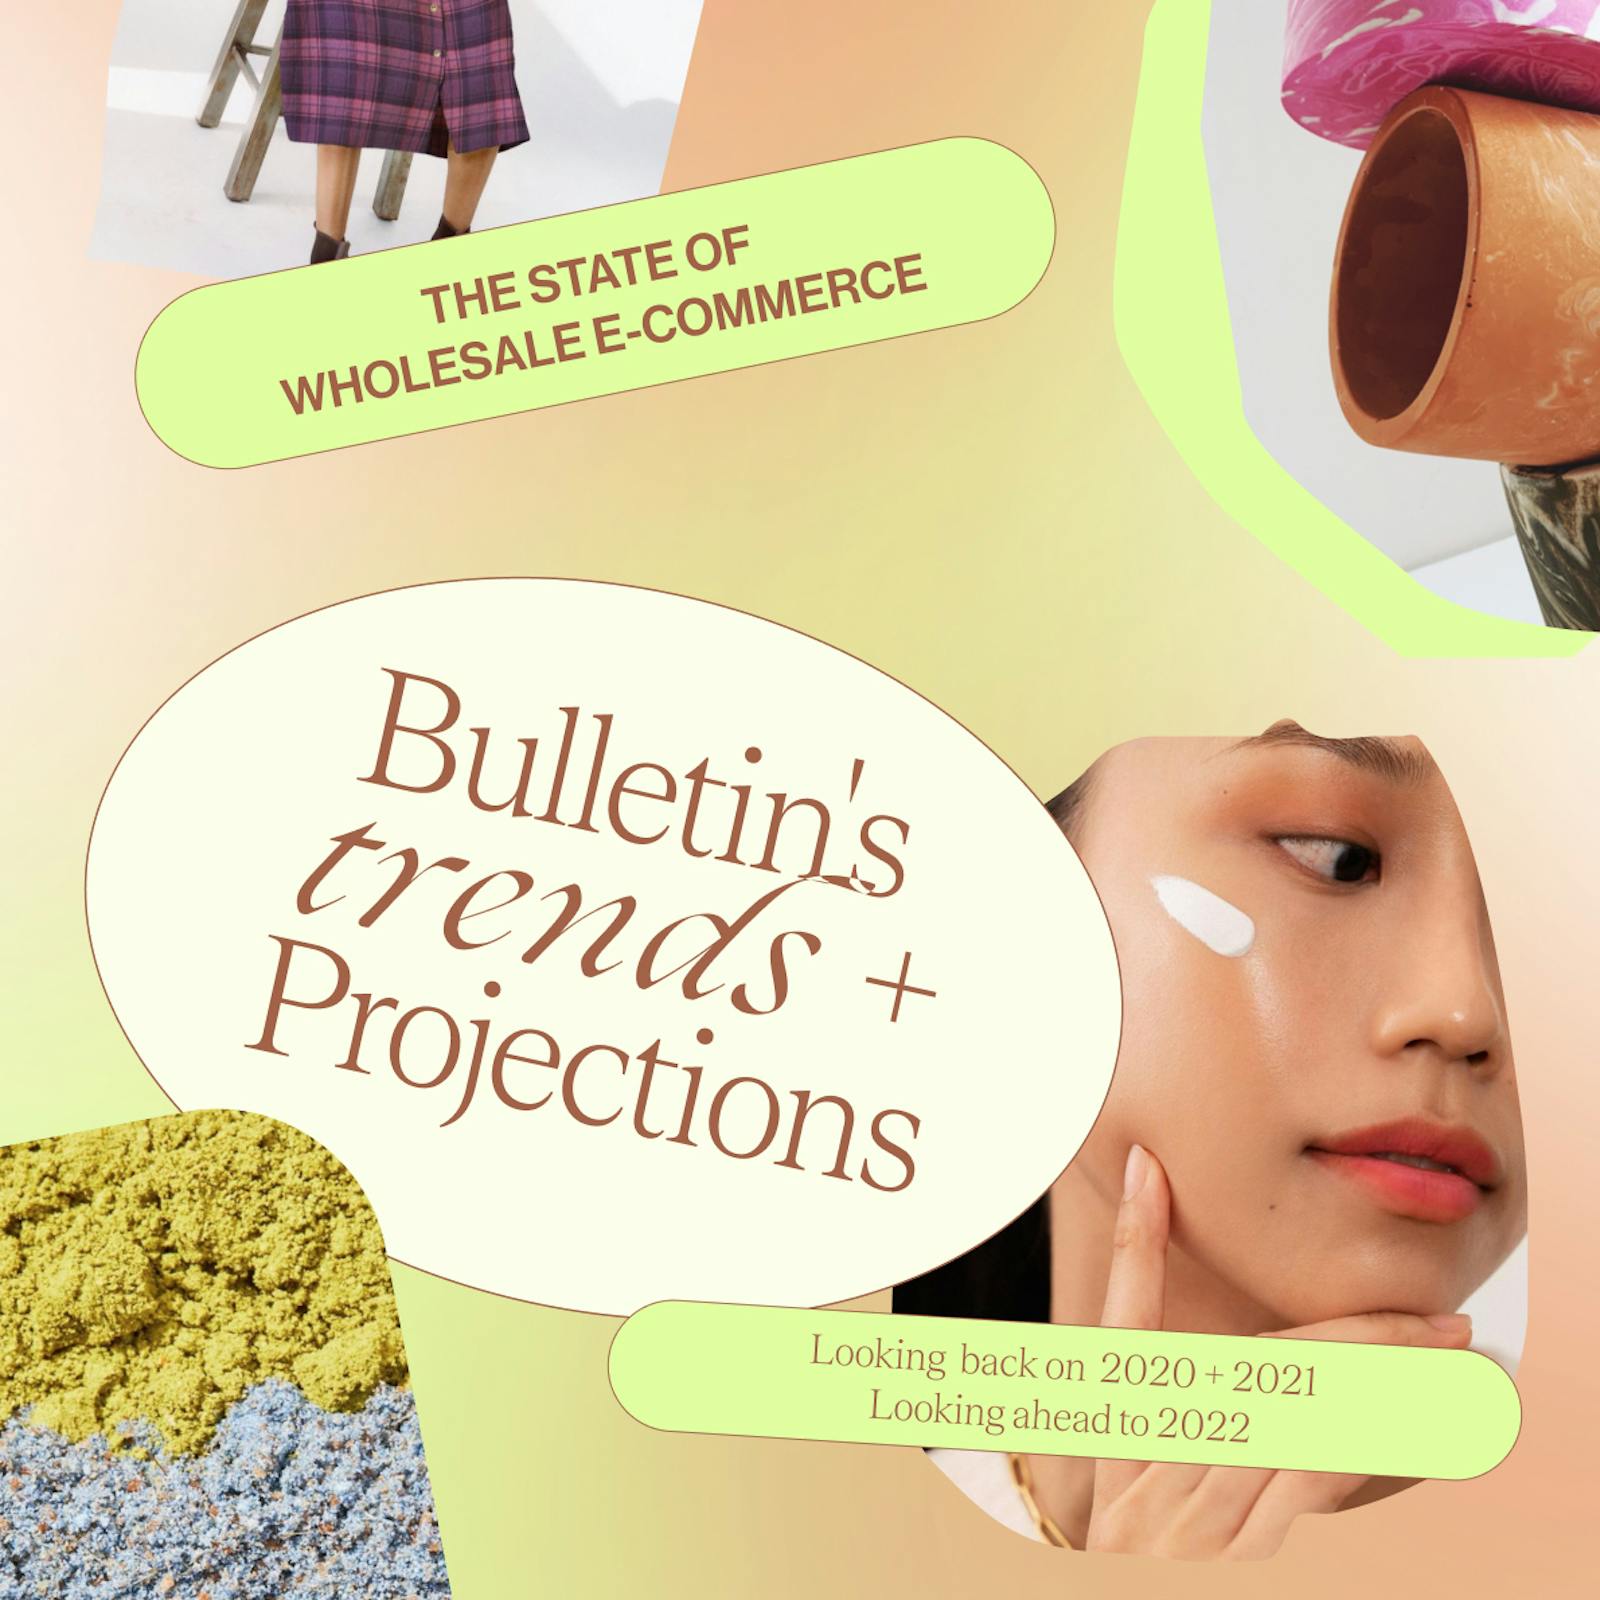 Q4 '21 Report for Retailers: Bulletin's Trends + Projections